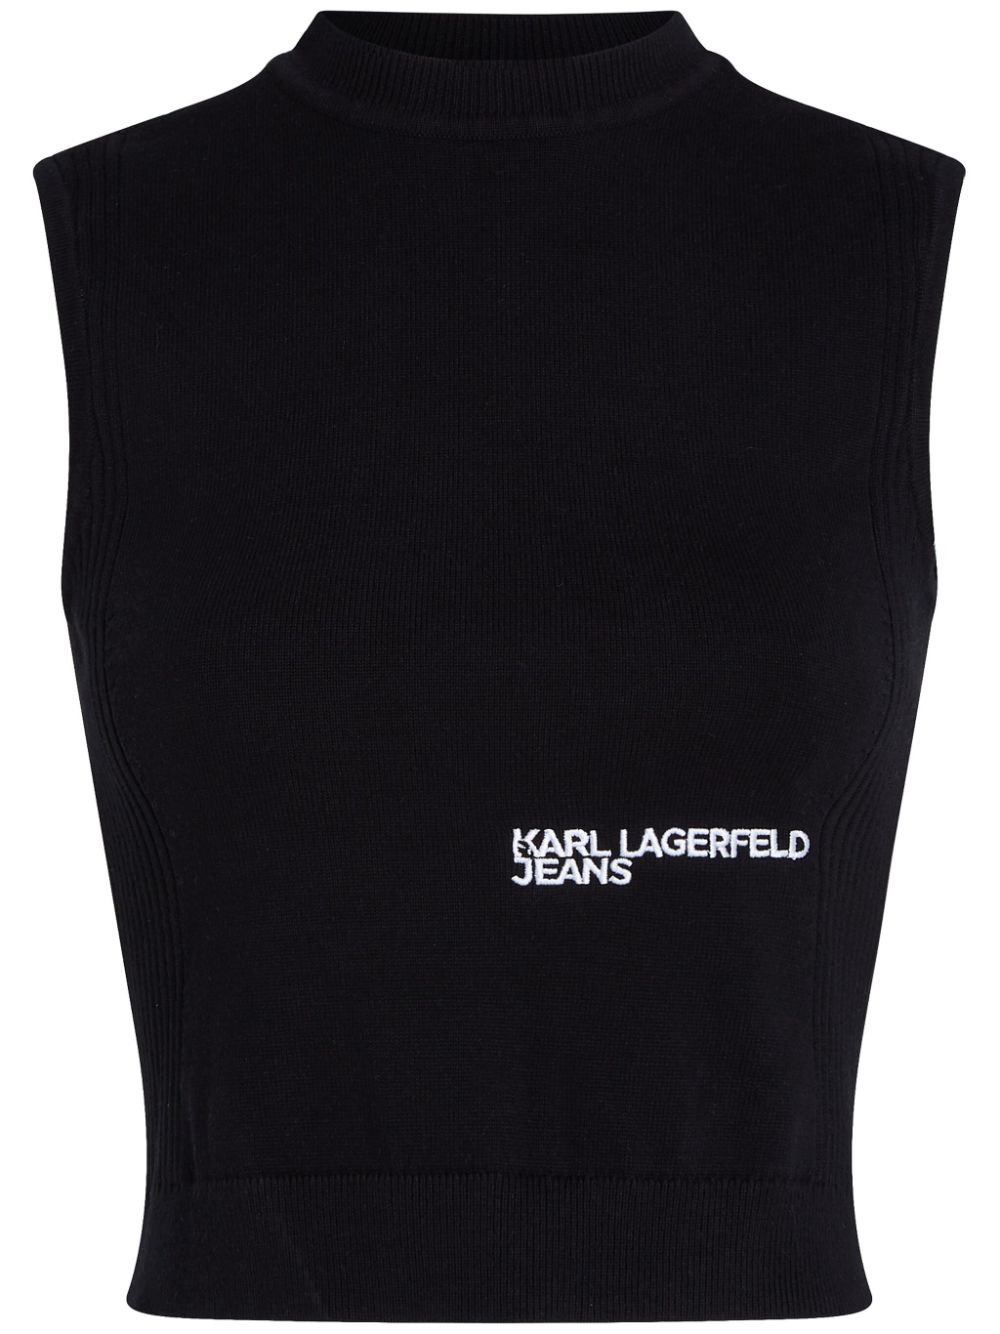 Karl Lagerfeld Jeans open-back knitted top - Black von Karl Lagerfeld Jeans